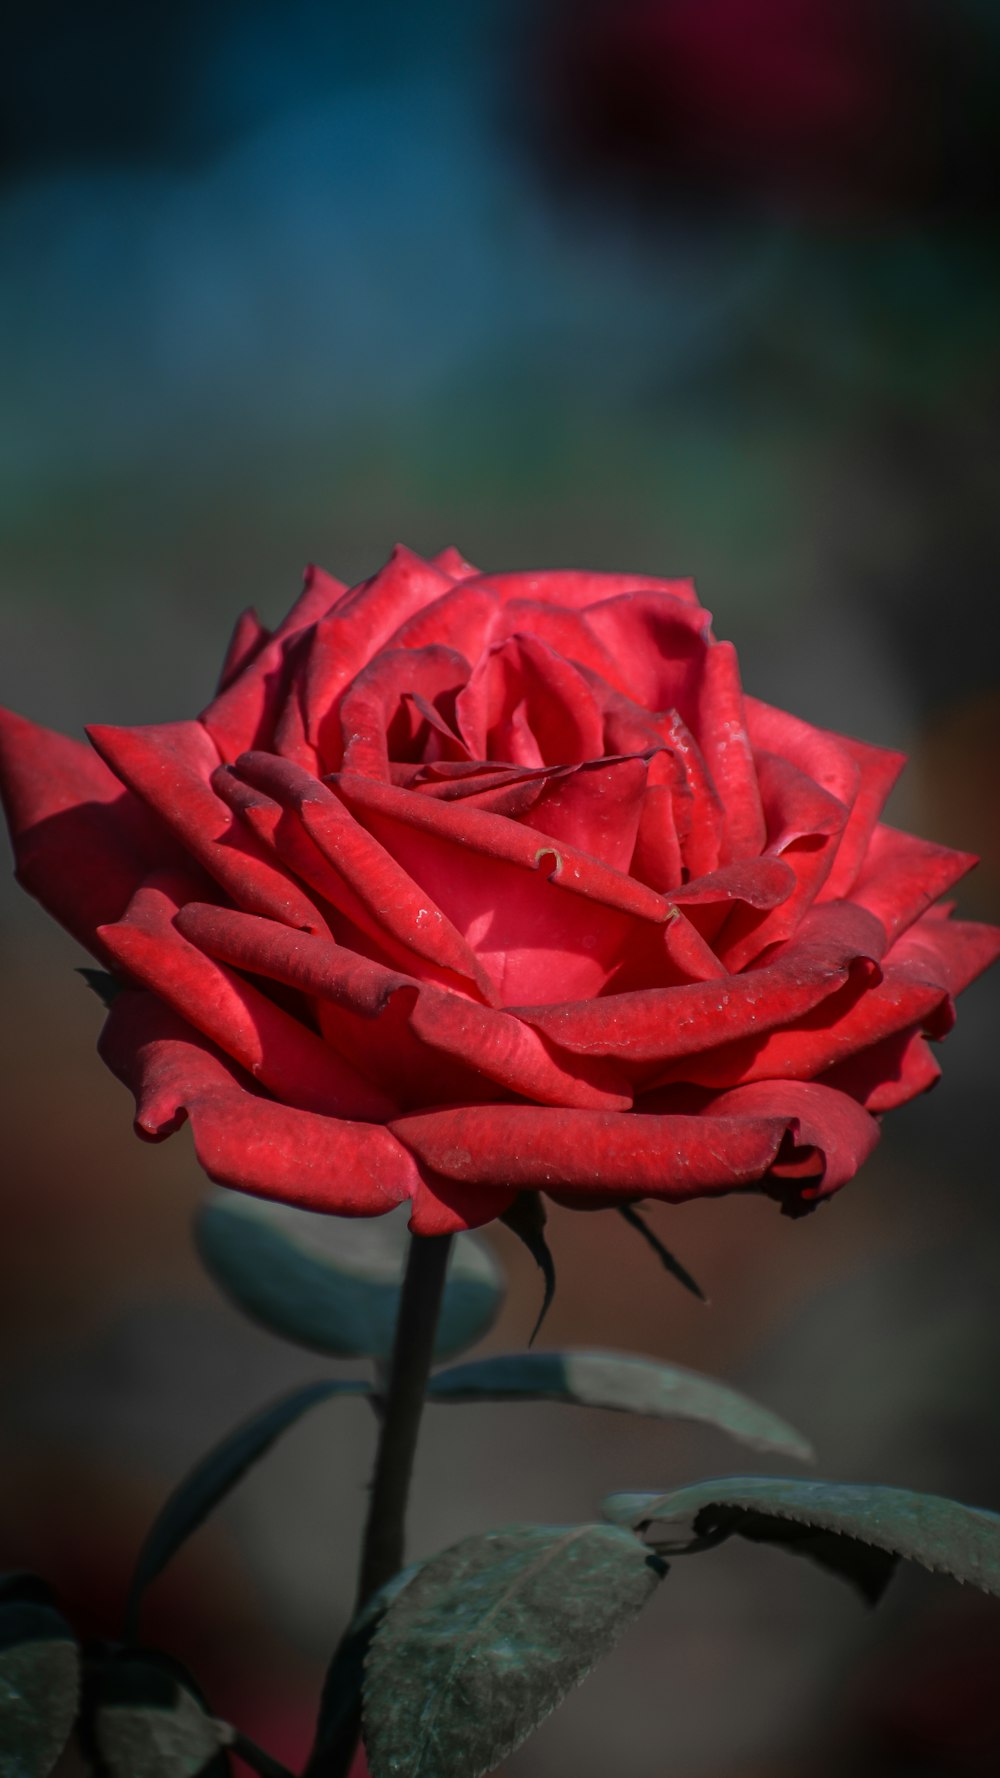 a close up of a red rose with a blurry background